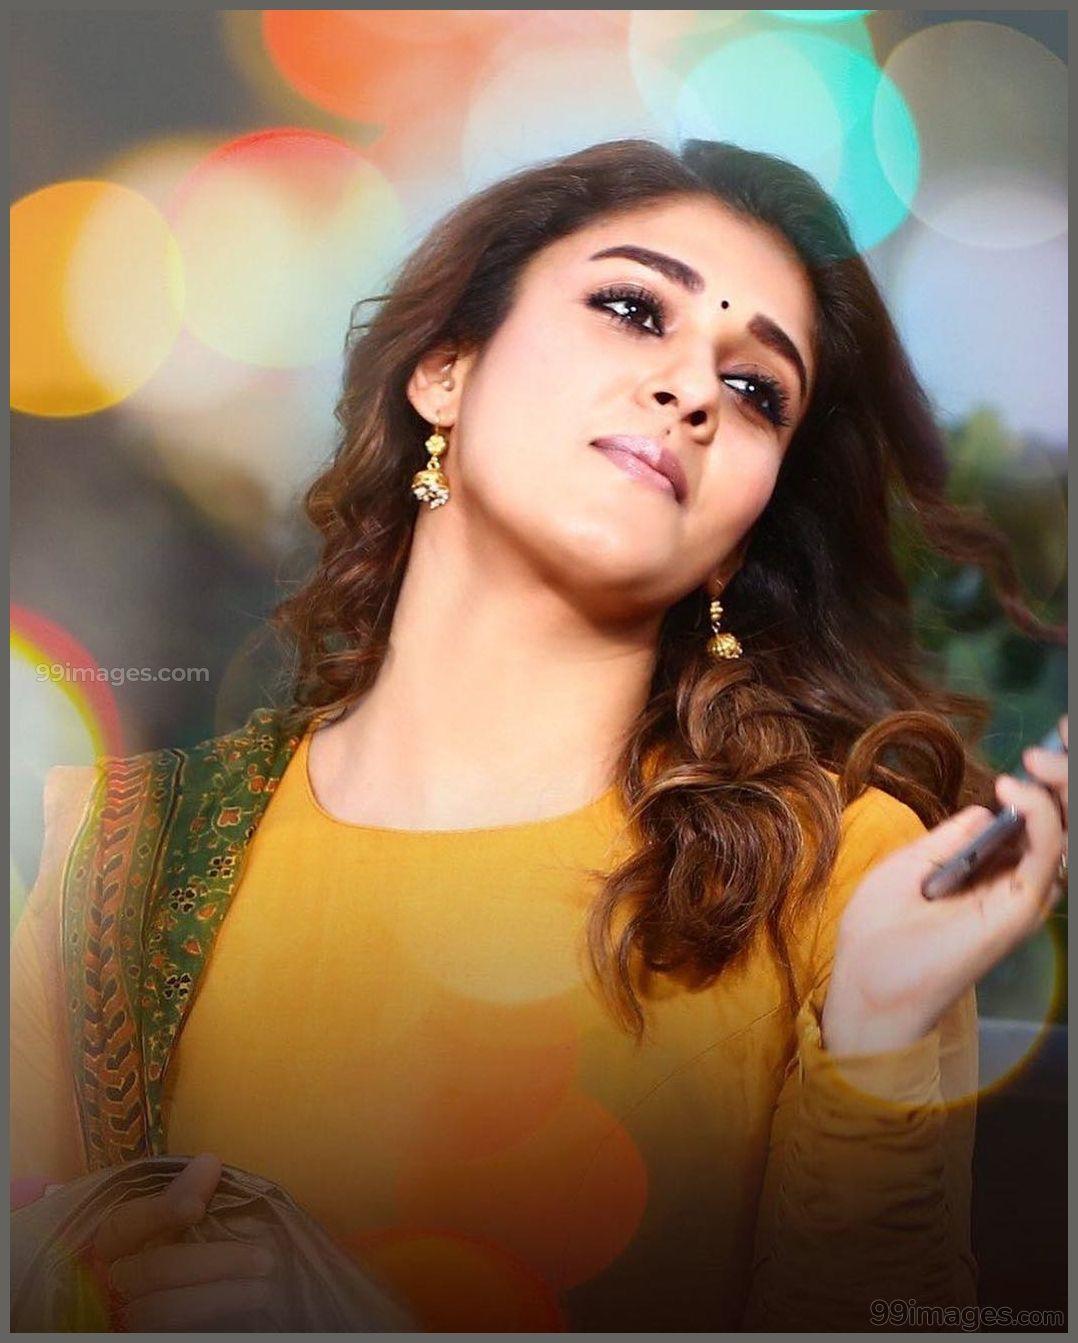 🔥 Nayanthara Full HD Mobile Wallpapers Photos Pictures WhatsApp Status DP  Free Download